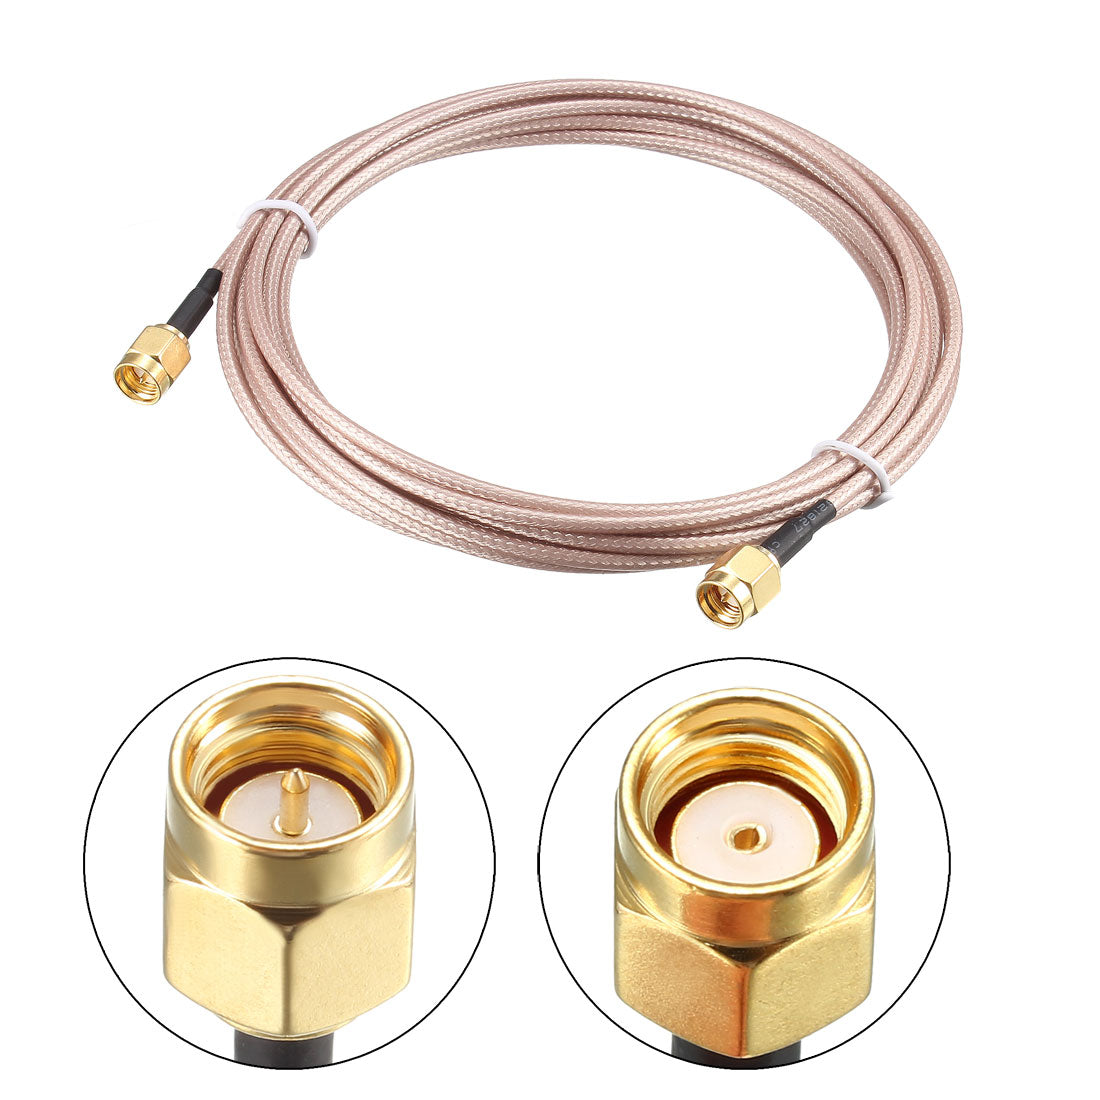 Uxcell Uxcell Low Loss RF Coaxial Cable Connection Coax Wire RG-178, RP-SMA Male to SMA Male 500cm